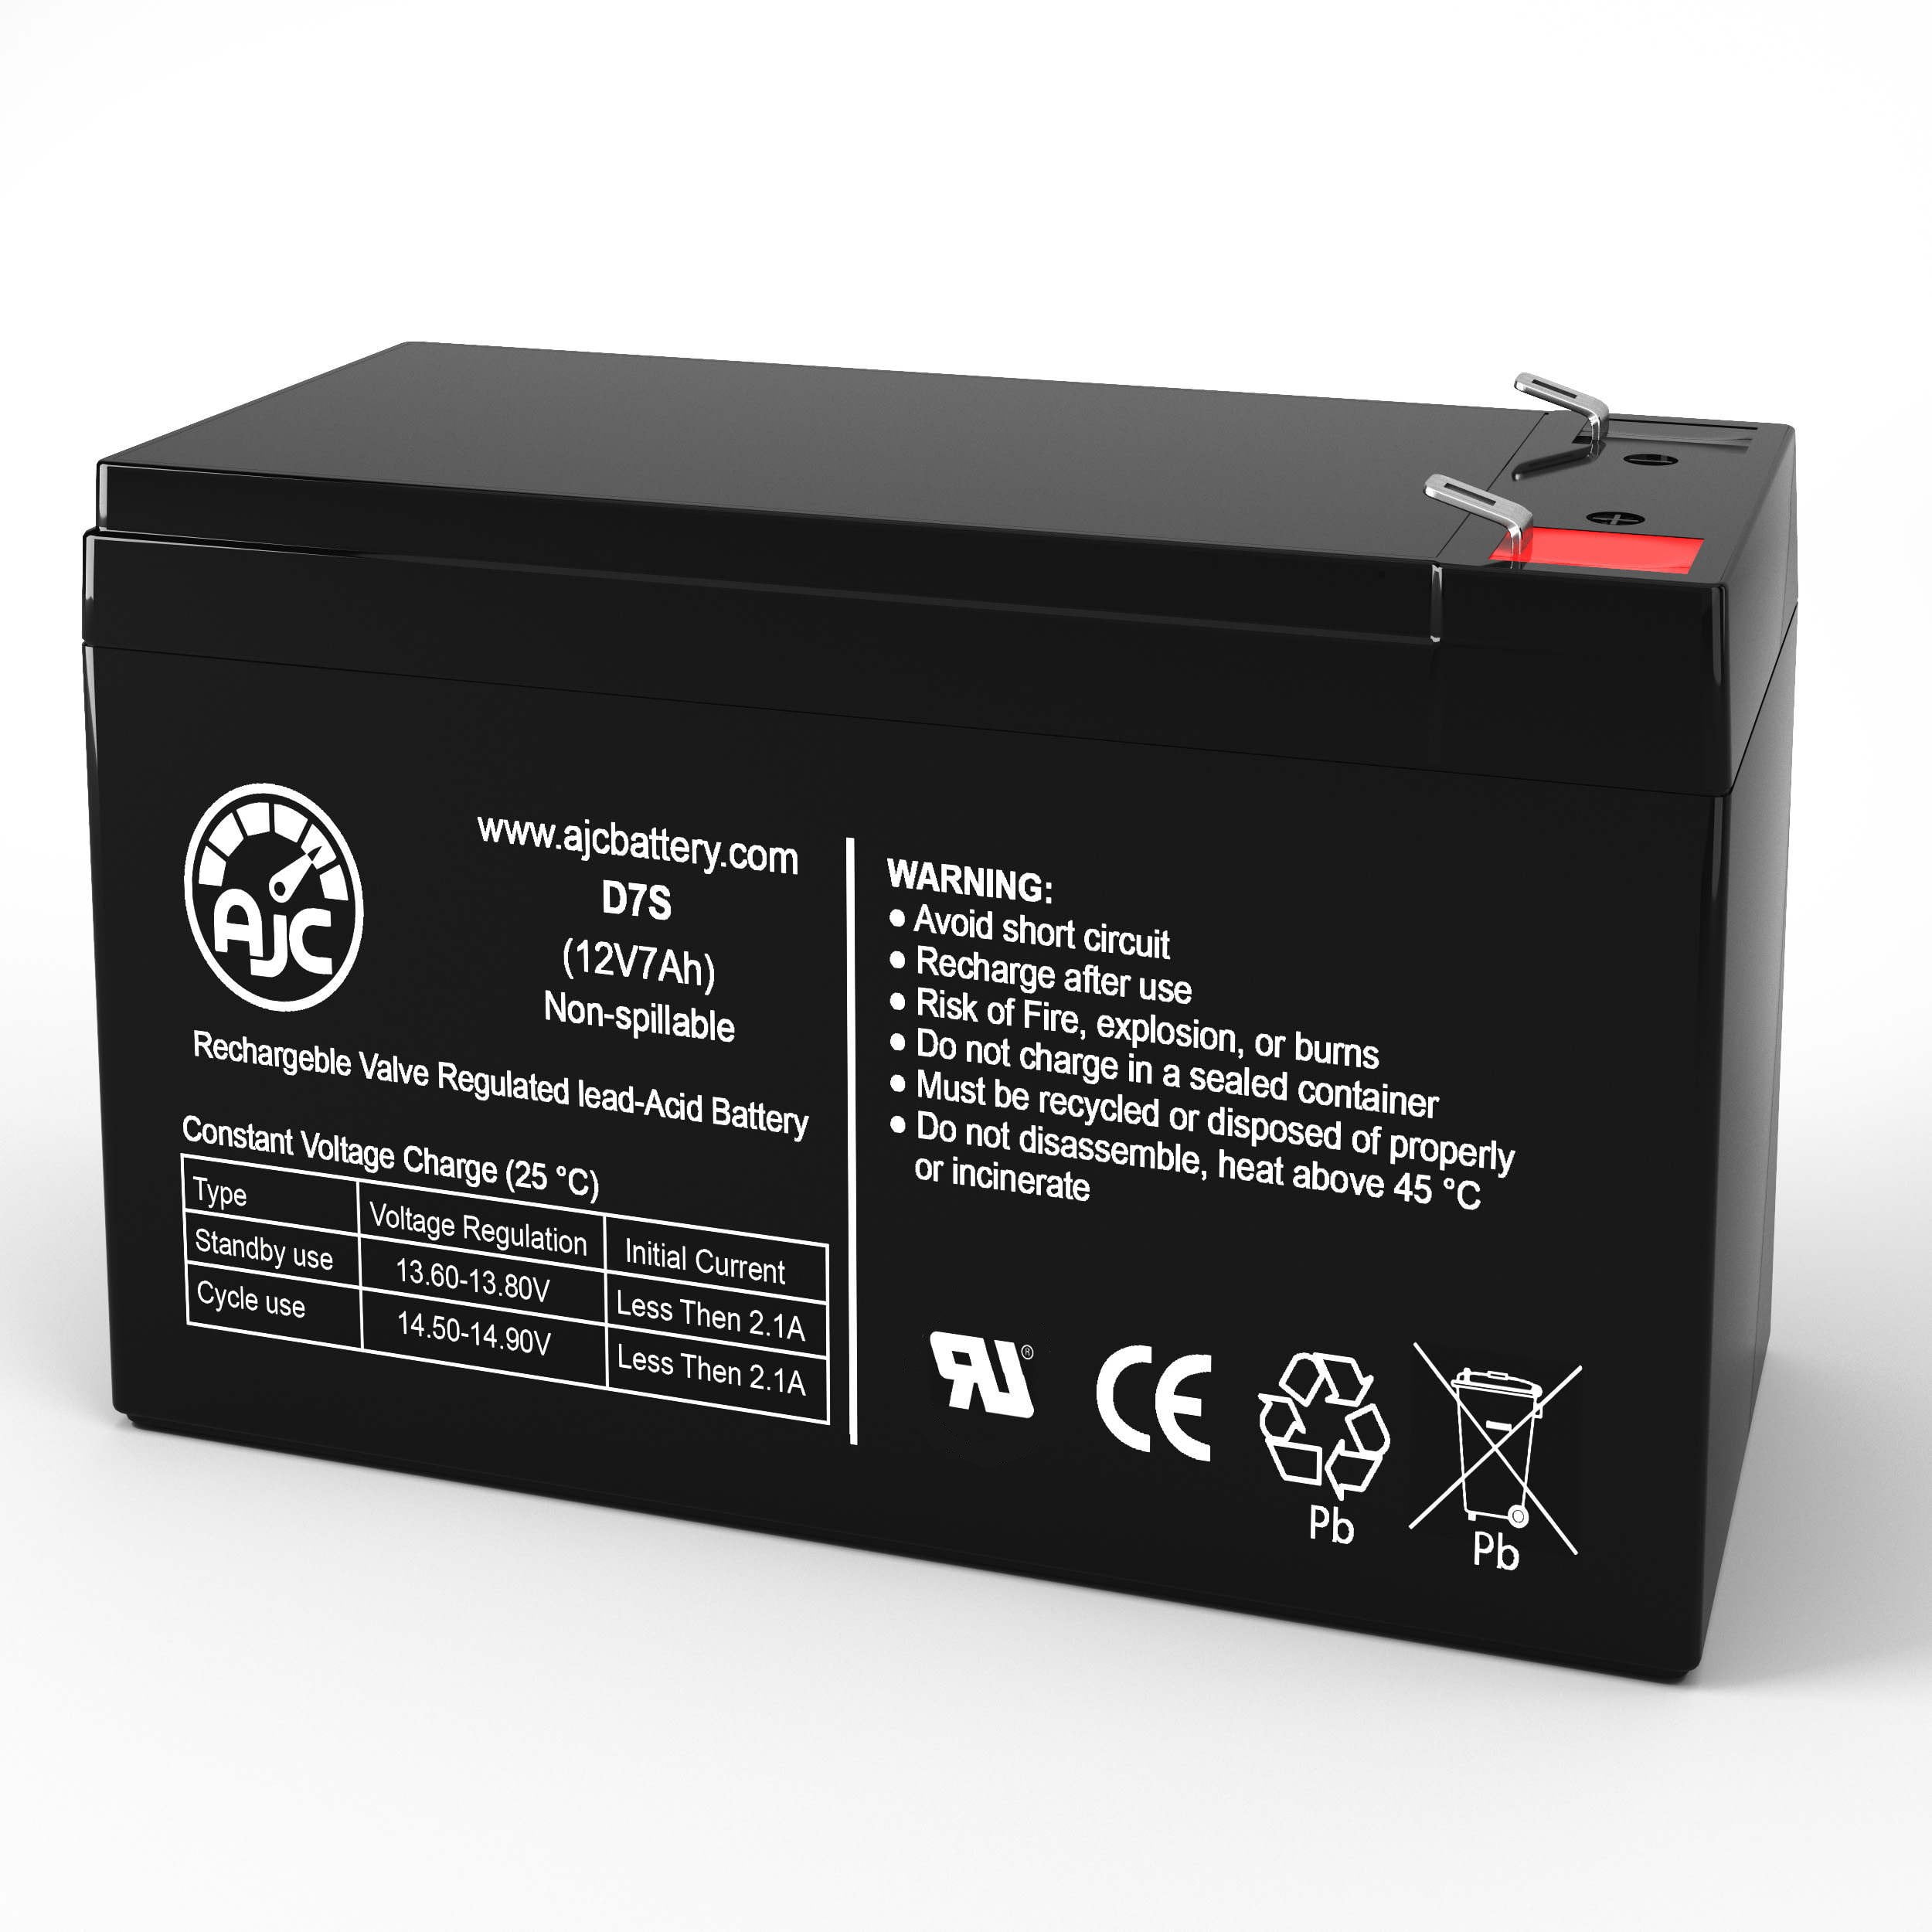 para Systems Minuteman PRO 320 12V 7Ah UPS Battery This is an AJC Brand Replacement 